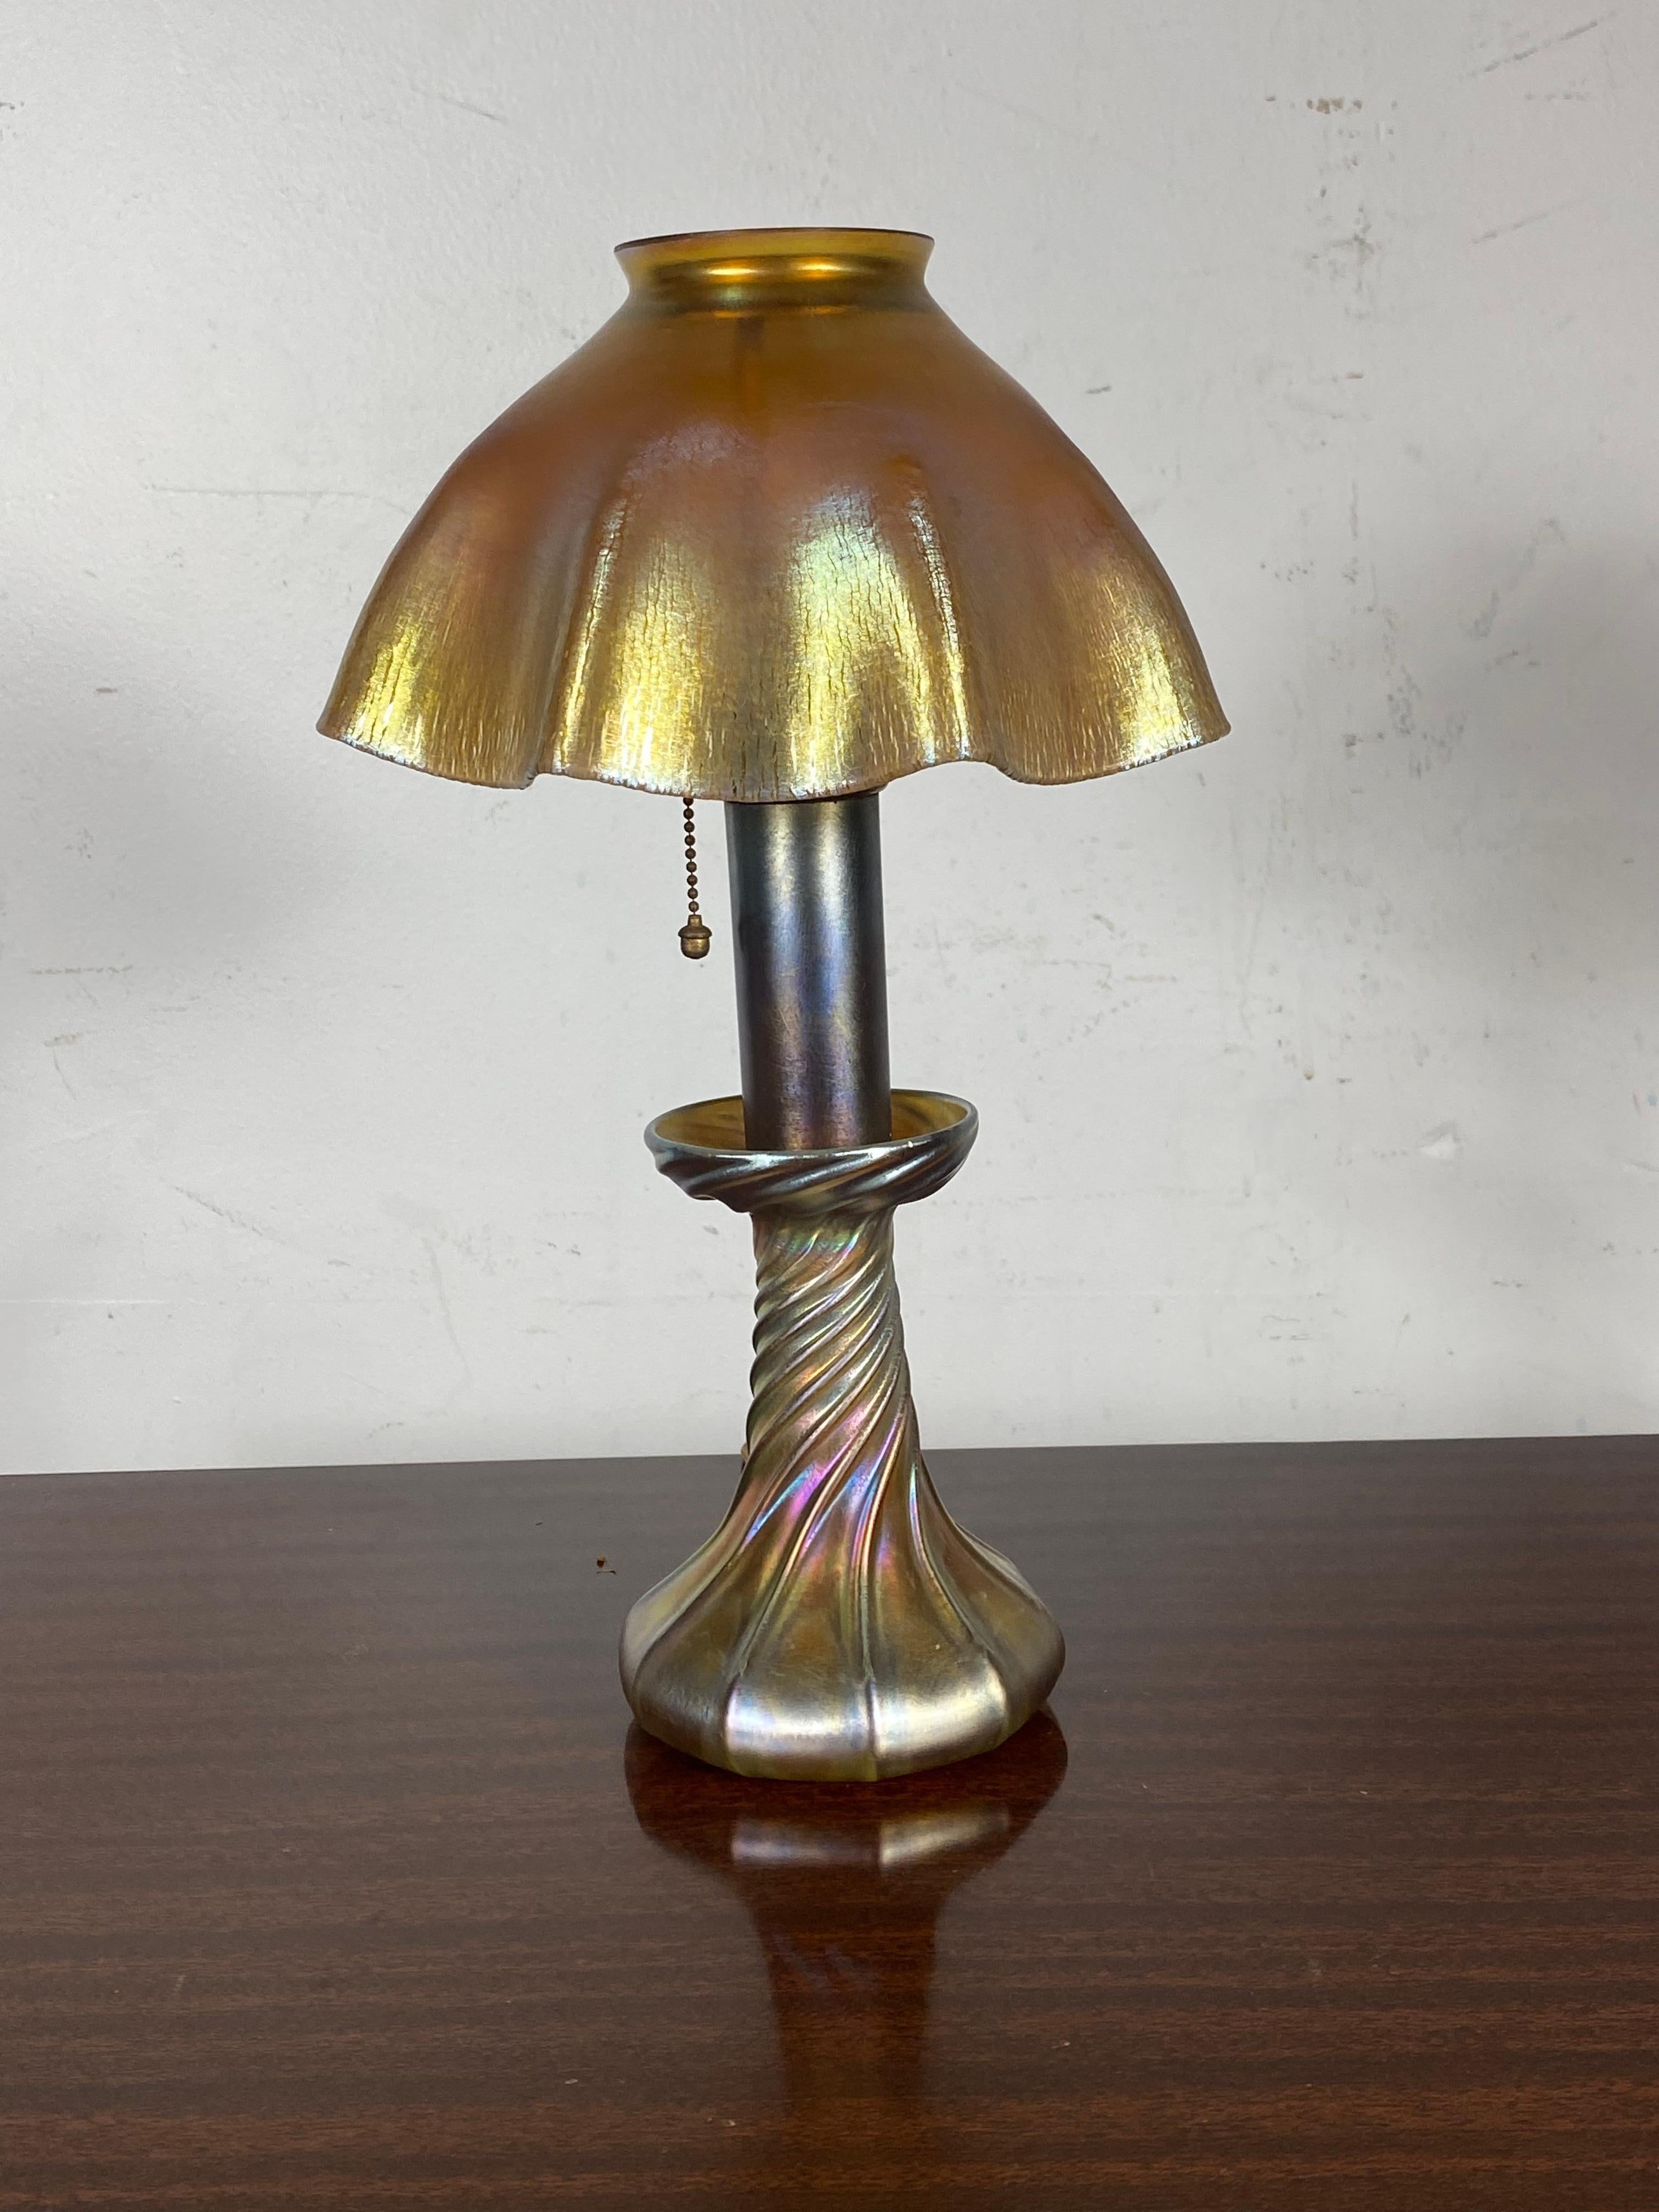 Early 20th Century American Art Nouveau Favrile Desk Lamp by, Tiffany 3